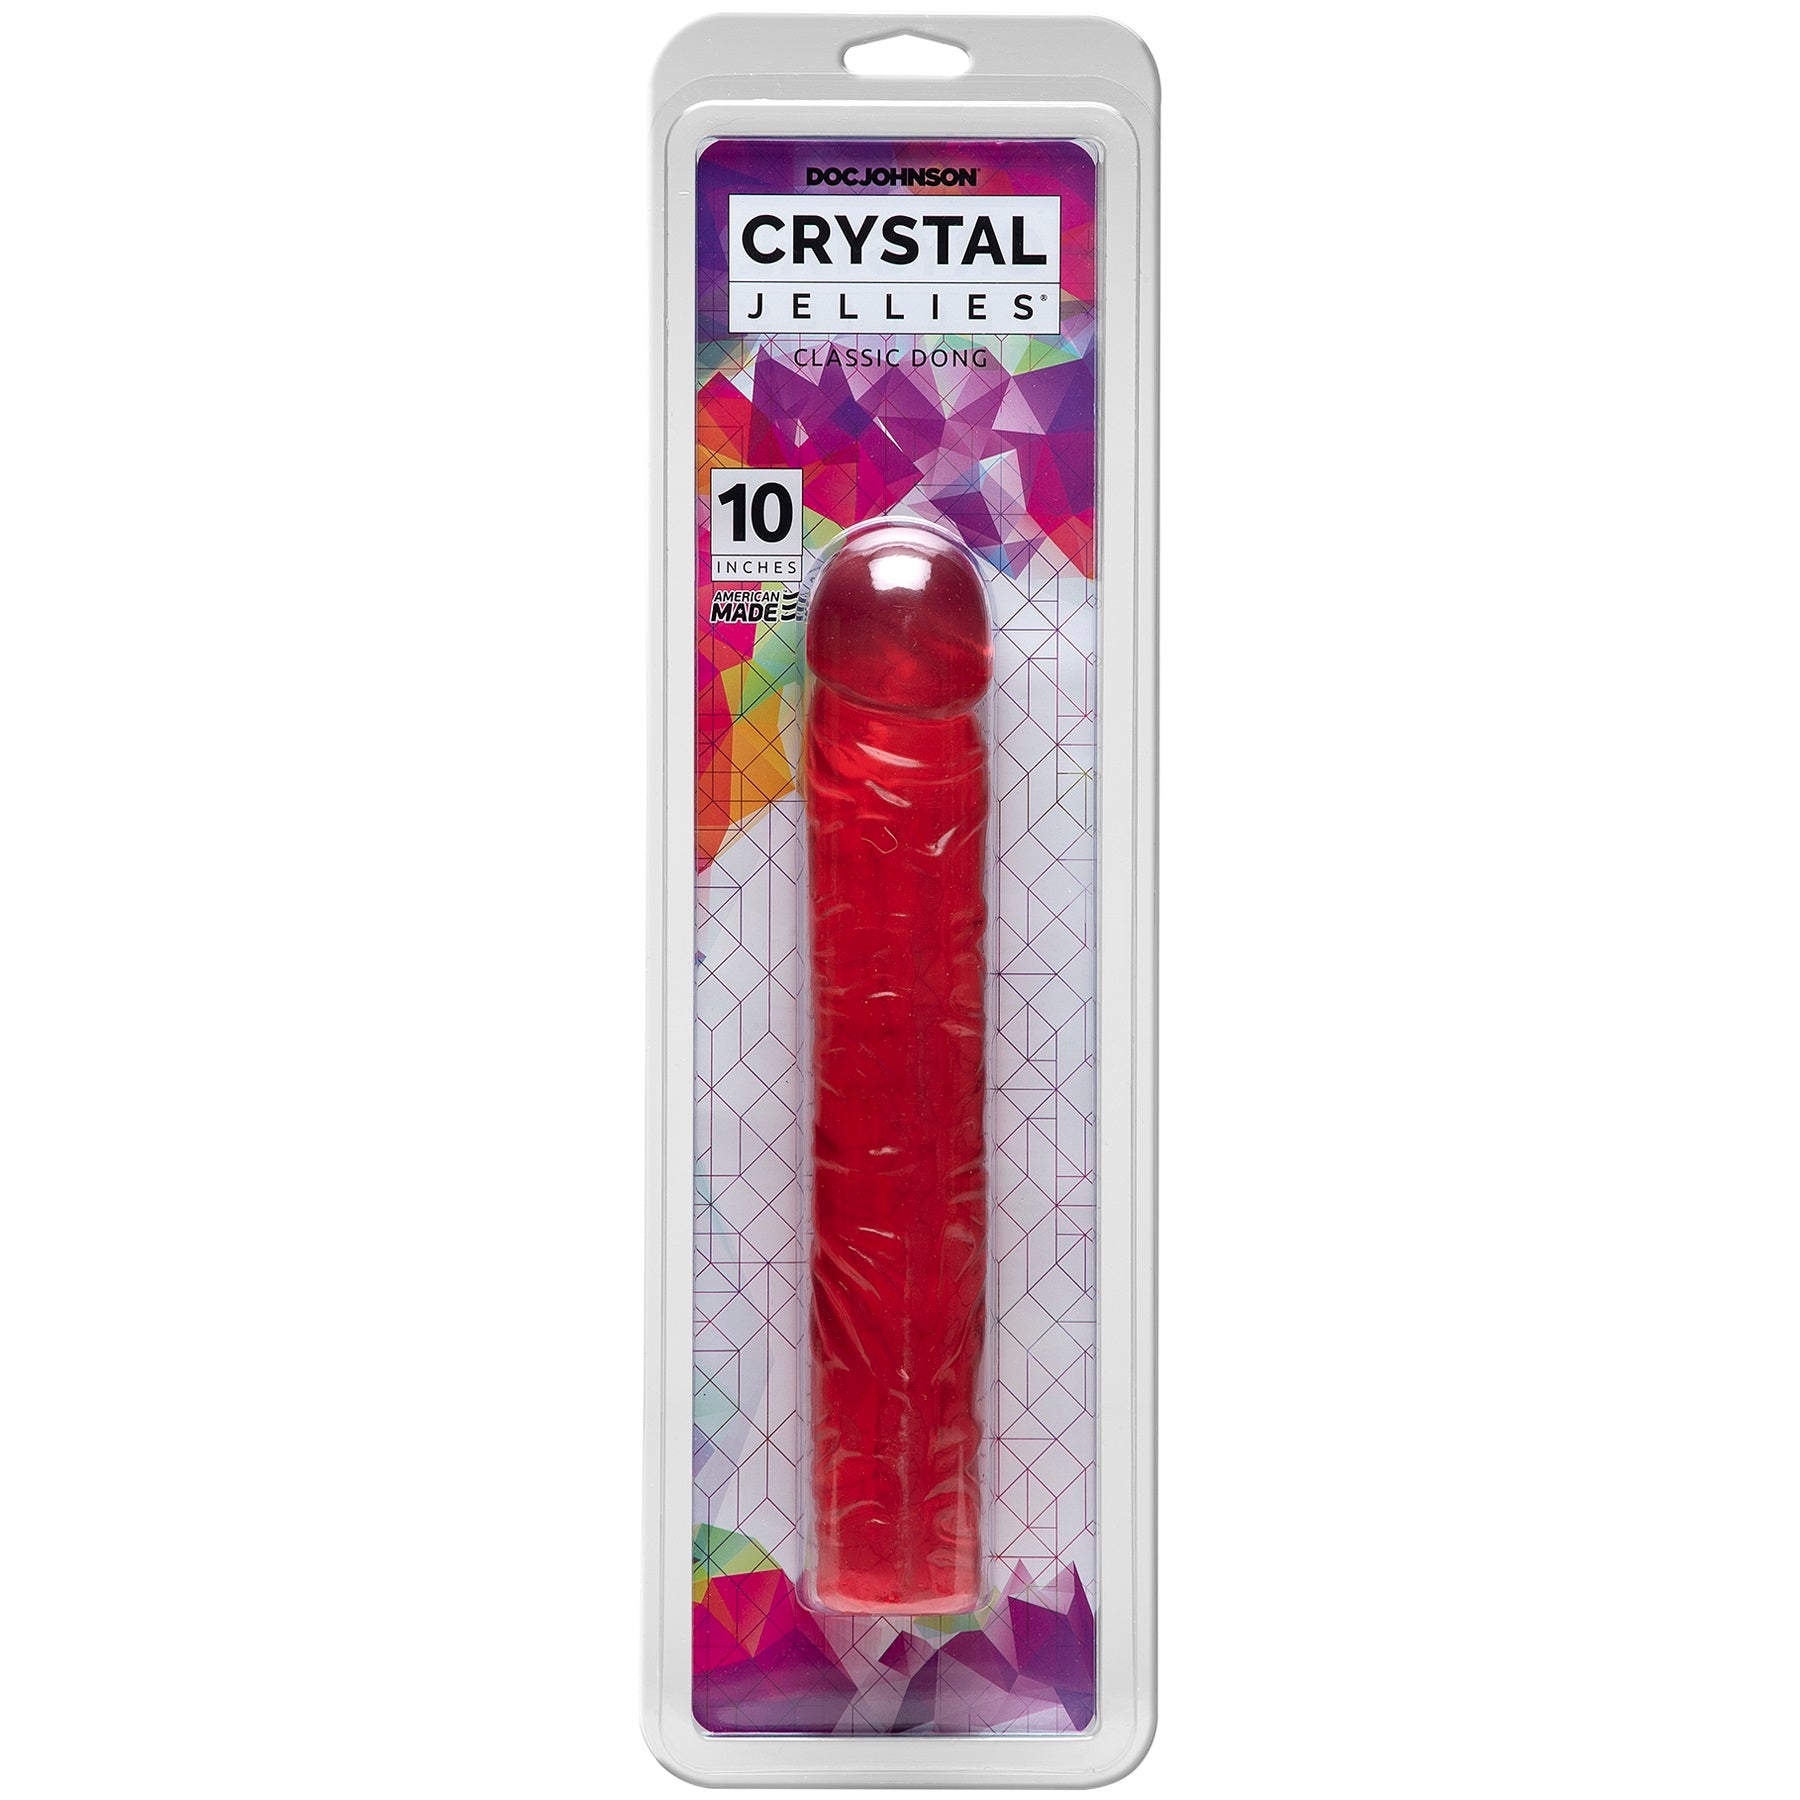 Crystal Jellies Classic Dong 10 Inch - Pink-1